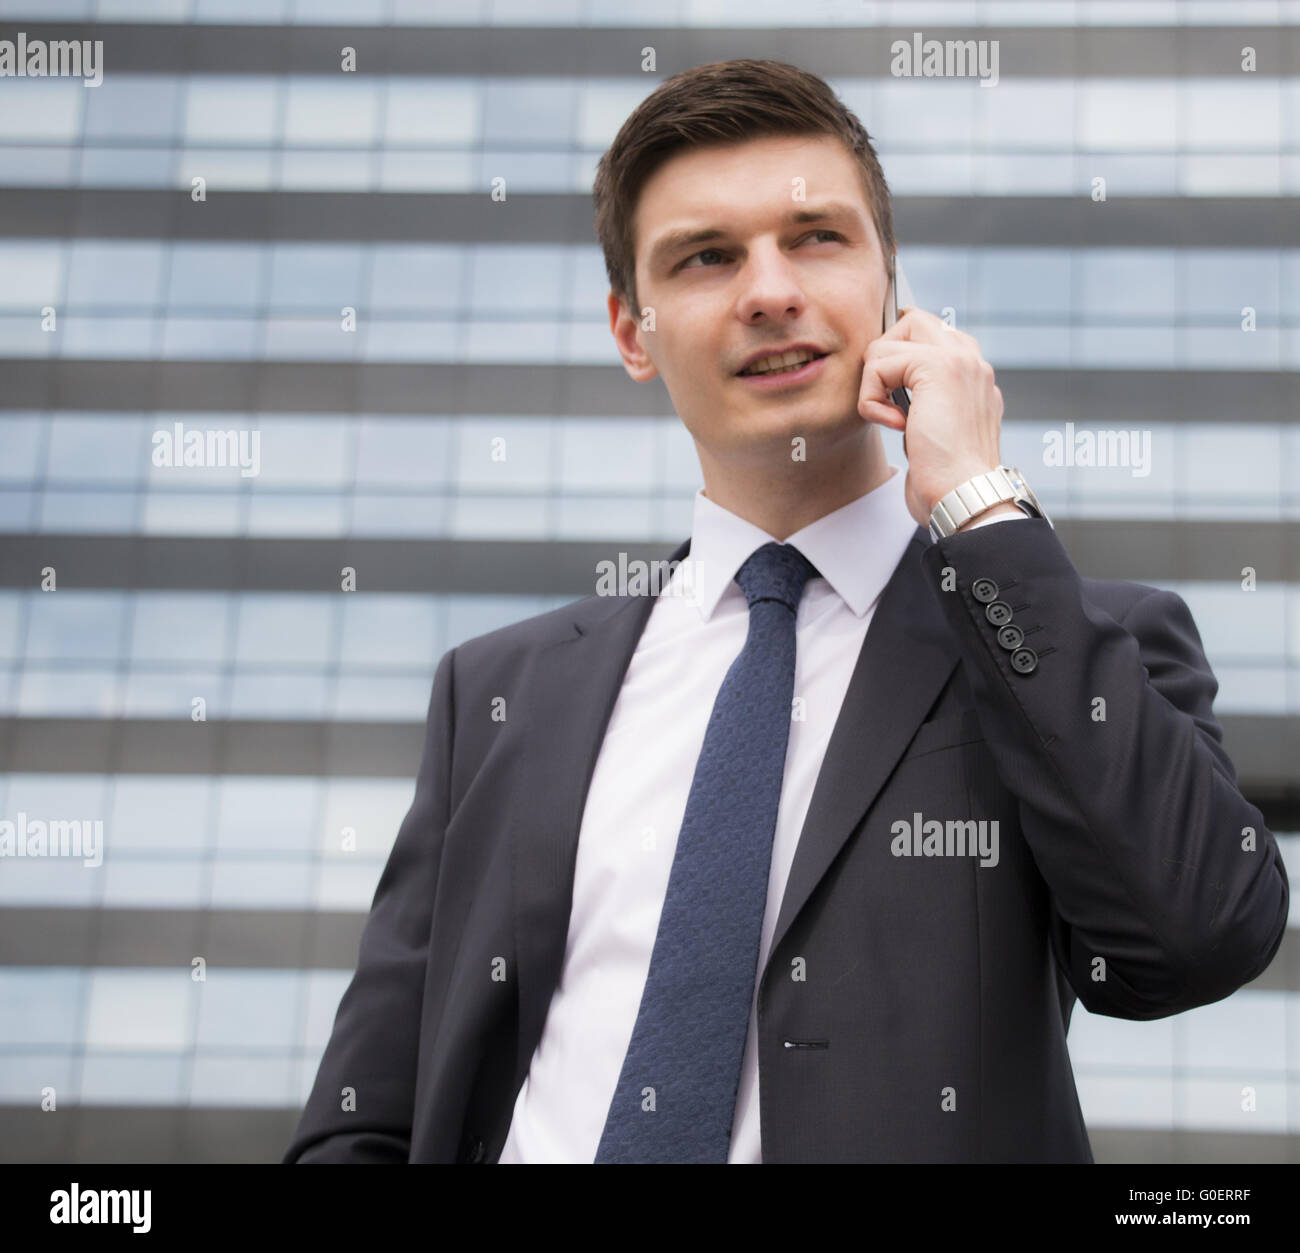 Young businessman in an urban setting Stock Photo